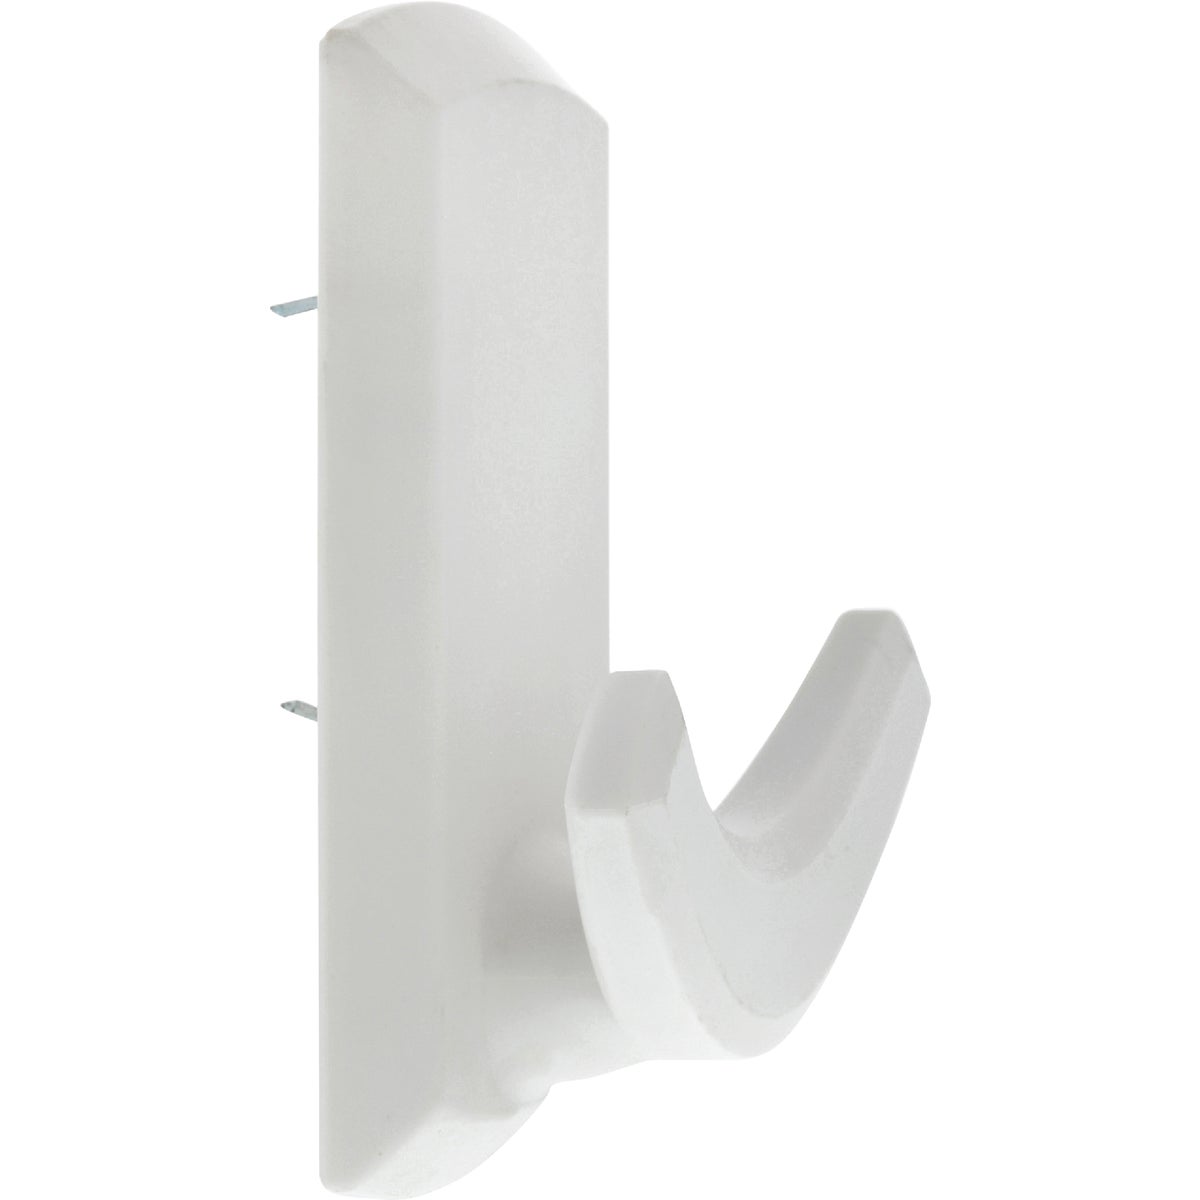 Hillman High and Mighty 20 Lb. Capacity White Rectangular Decorative Double Hook